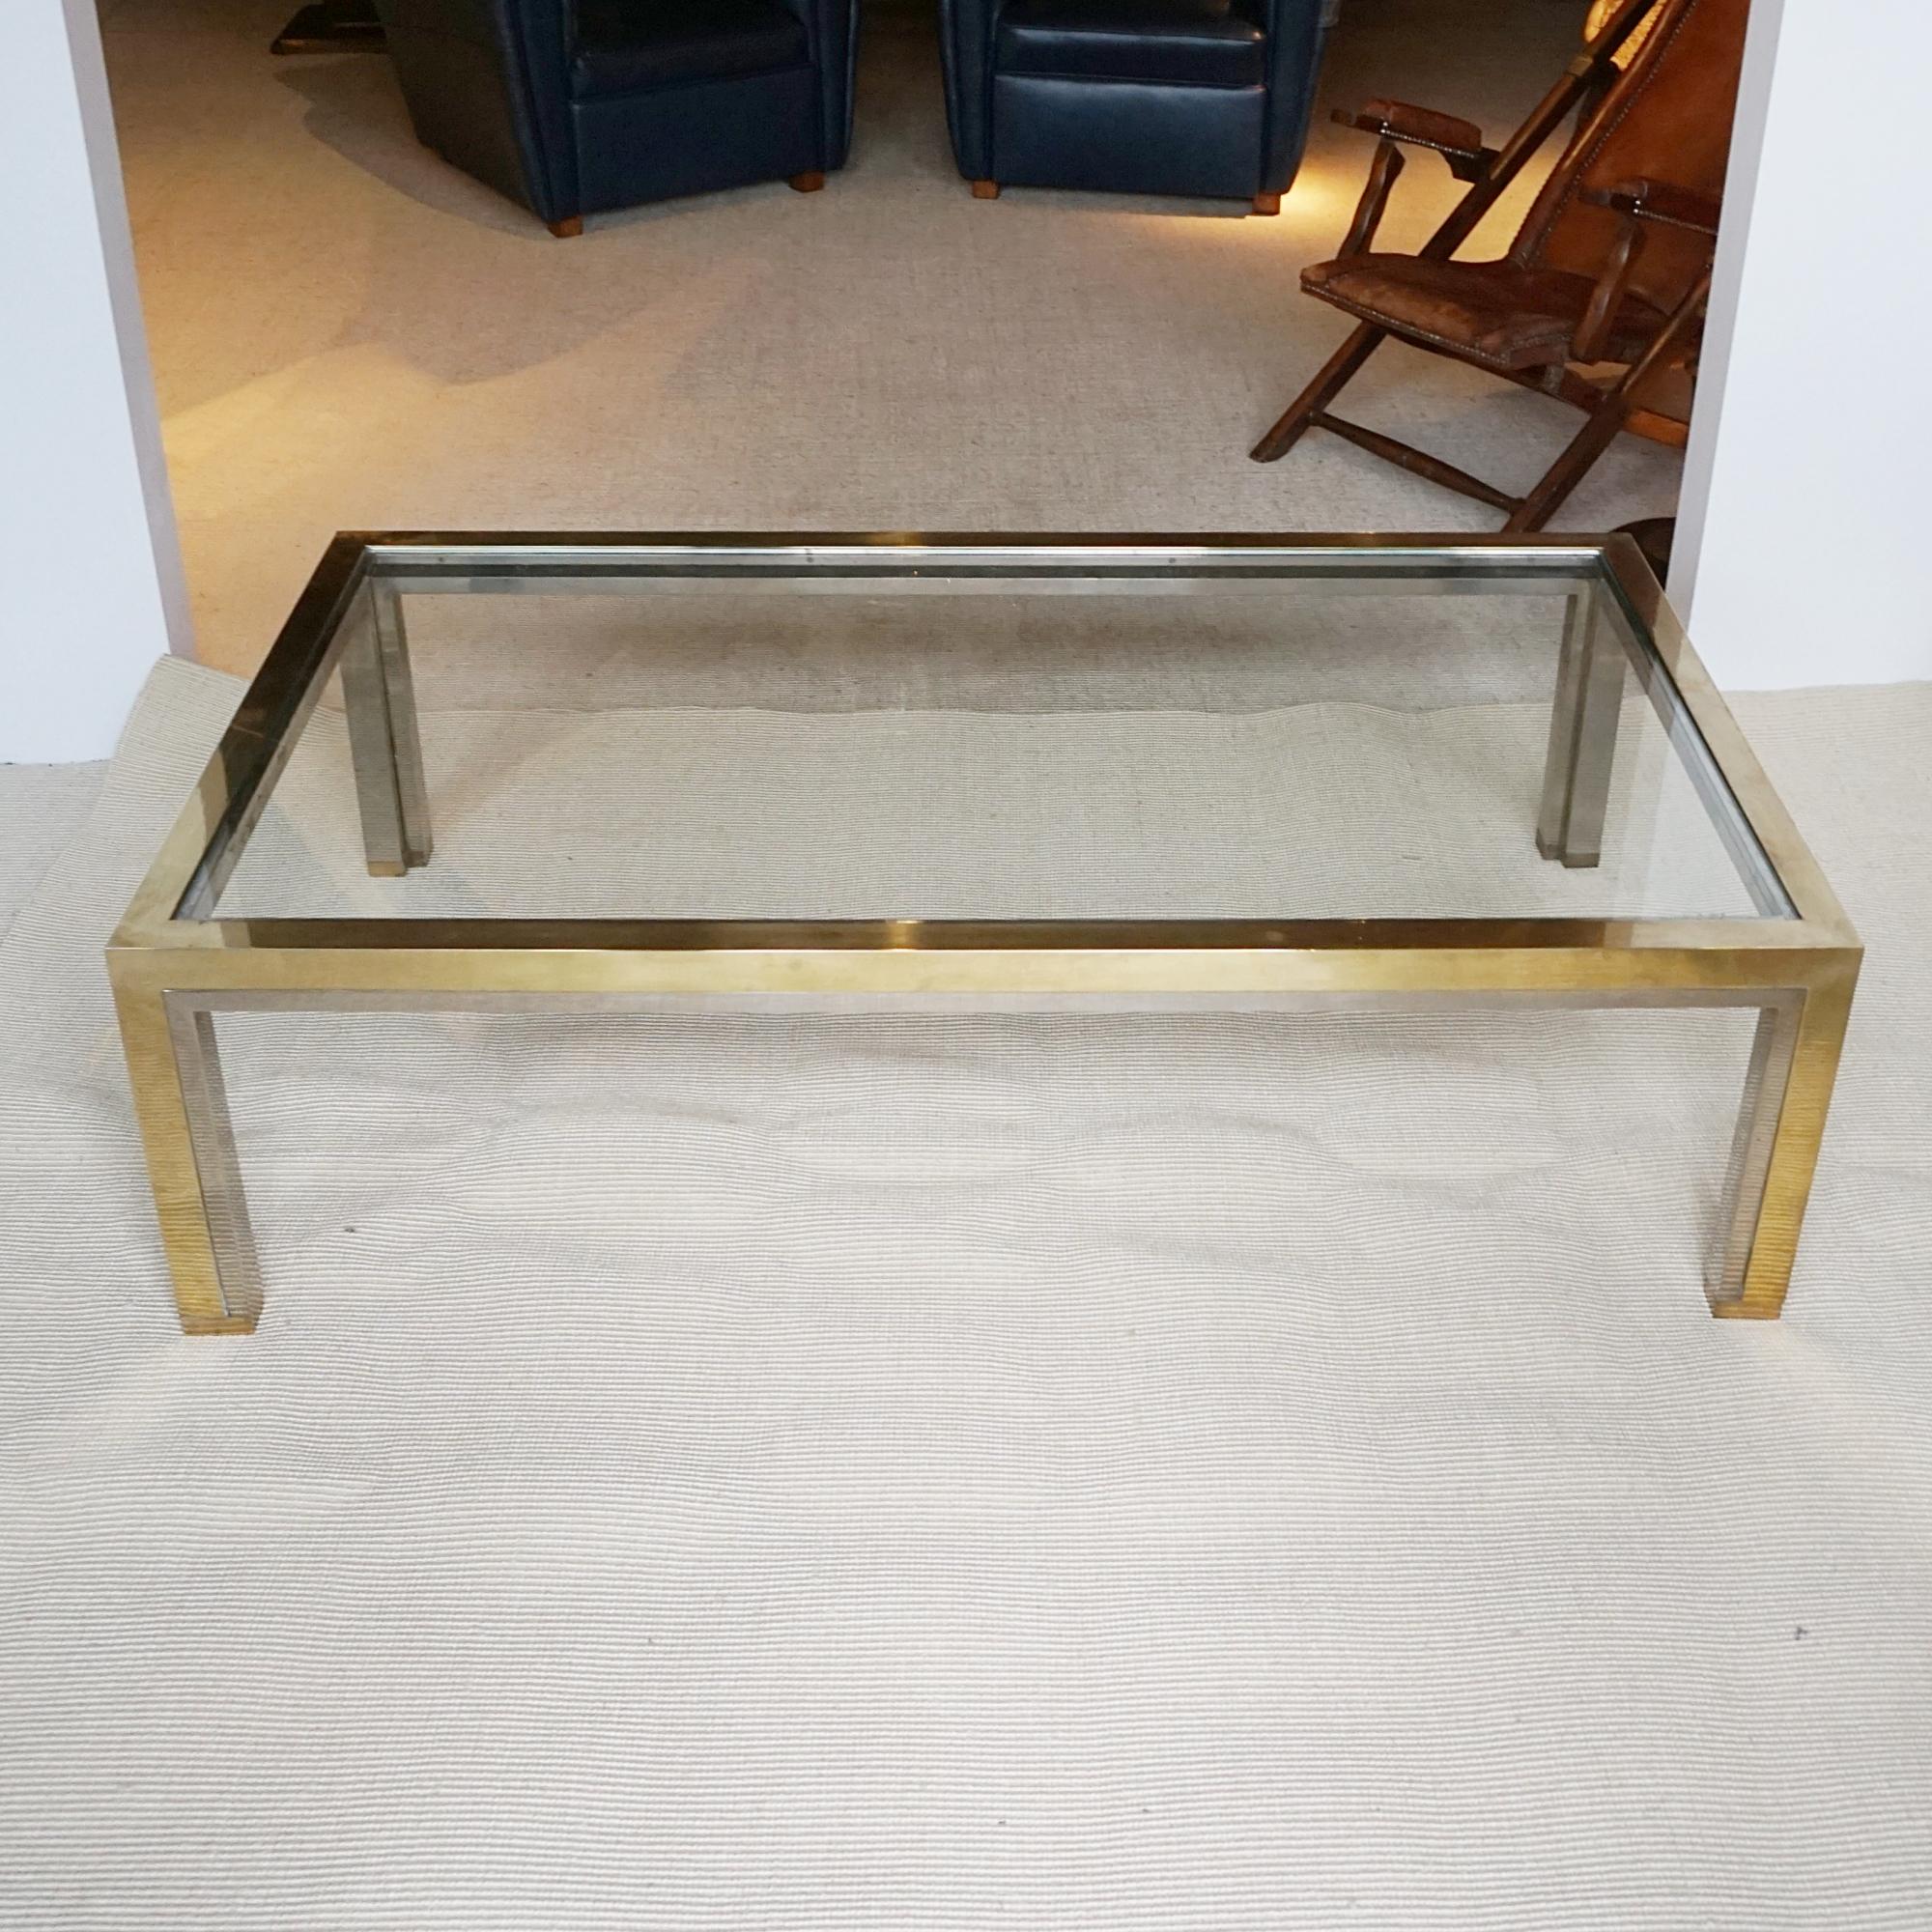 Brass and chrome rectangular frame with inset smoked glass top. 

Dimensions: H 40cm W 140cm D 80cm

Origin: Italian

Date: Circa 1970

Item Number: 1704242

Romeo Rega (1925–1981) was an emblematic figure in the world of Italian design, celebrated